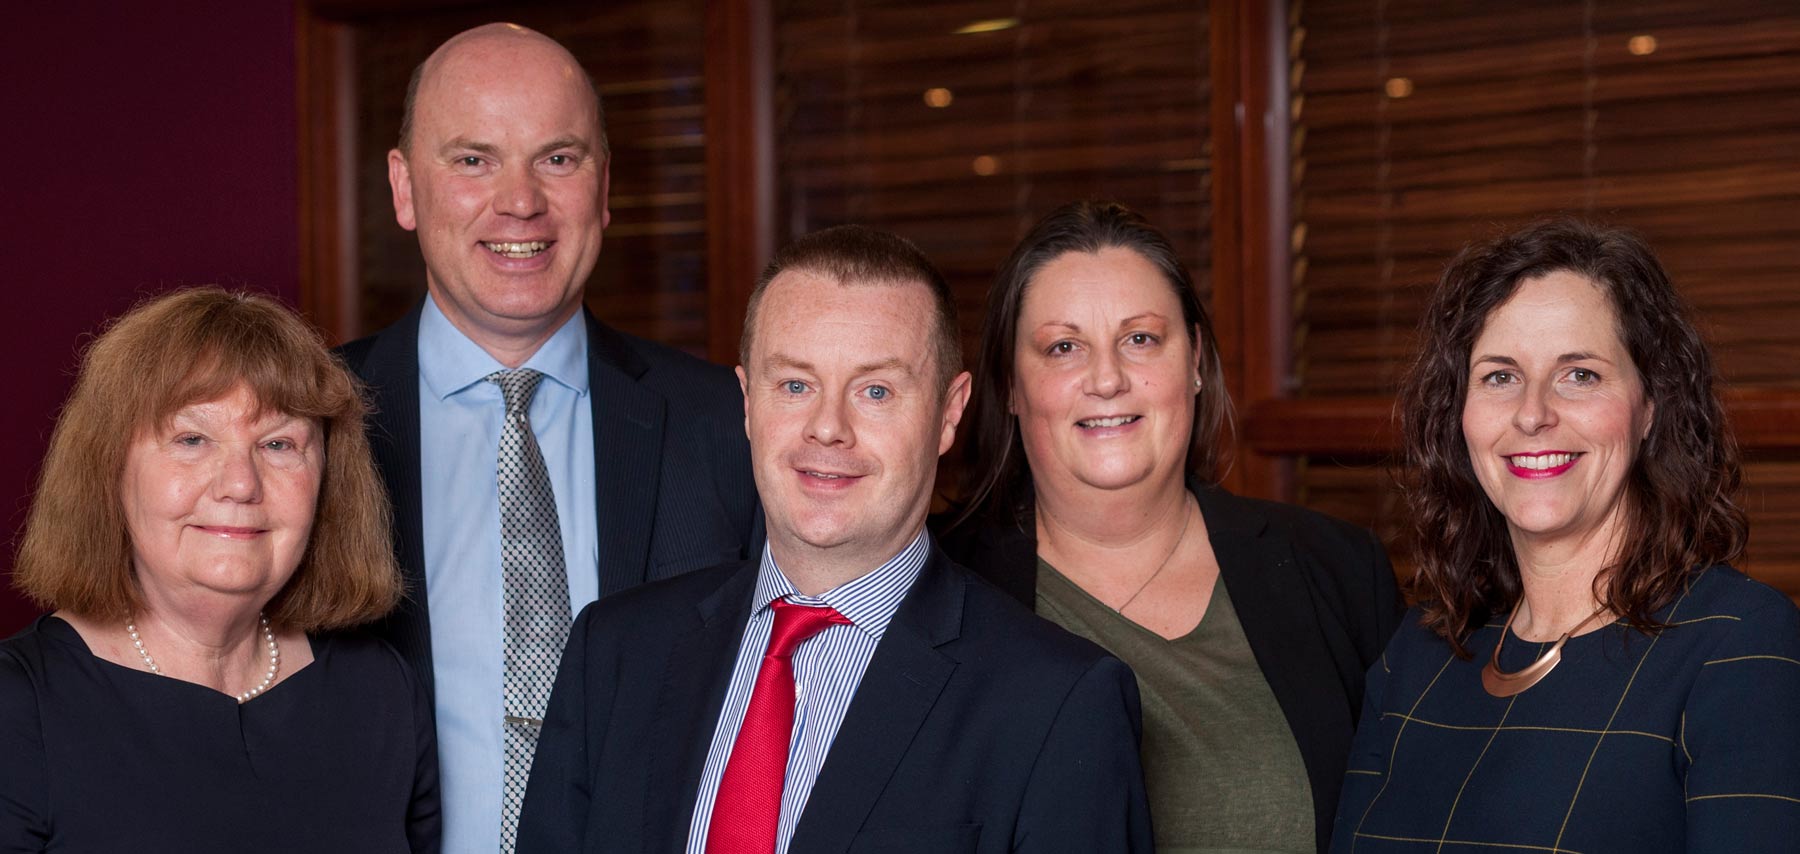 Switalskis Solicitors has further strengthened its position in the Yorkshire legal market